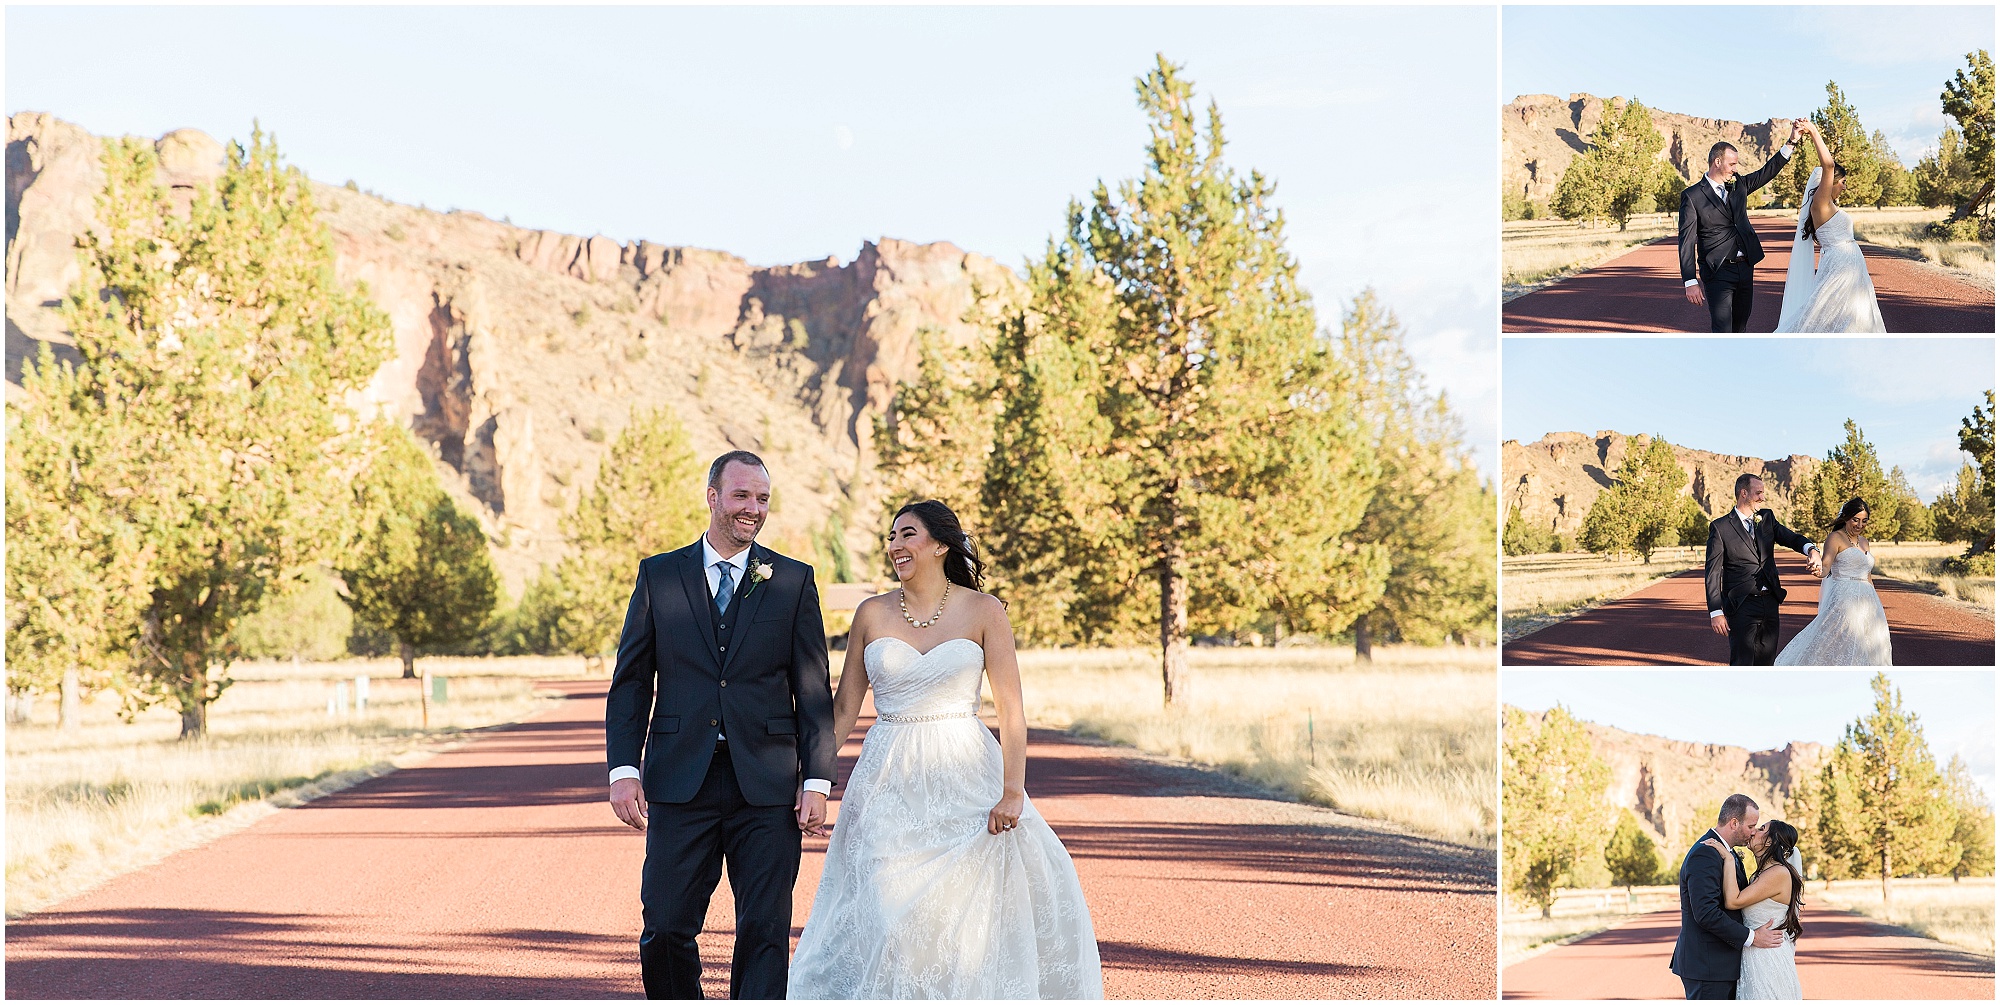 Fun wedding portraits at this Ranch at the Canyons fall wedding in Bend, OR. | Erica Swantek Photography